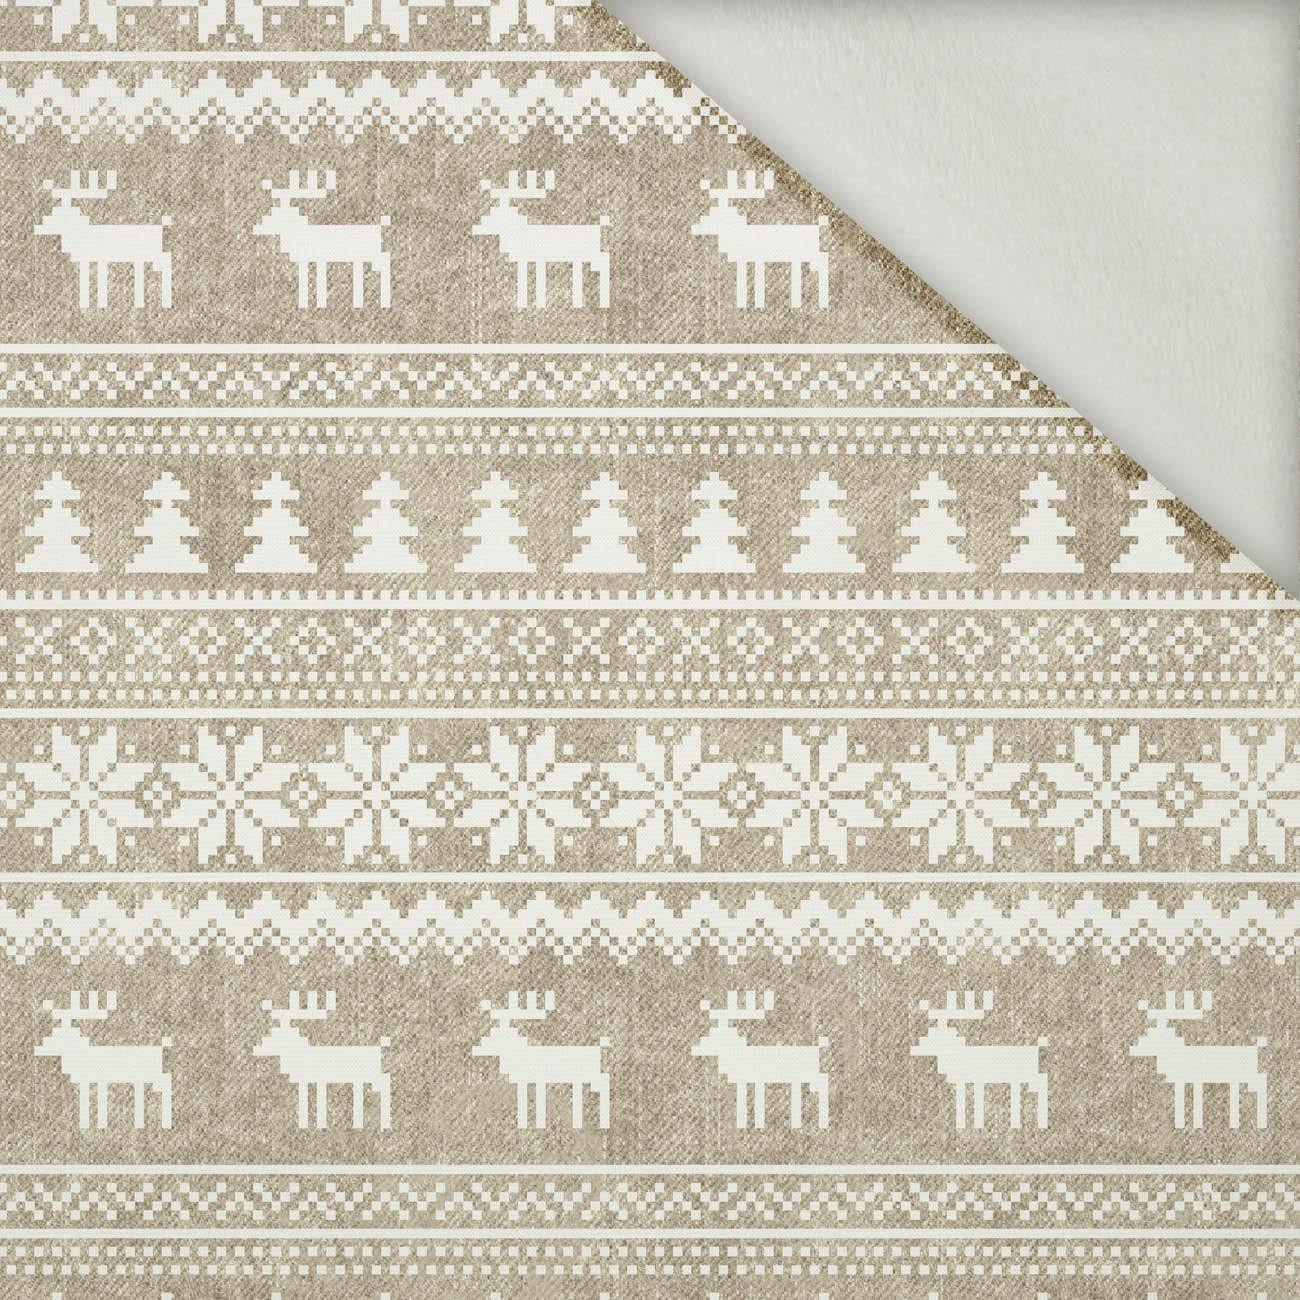 REINDEERS PAT. 2 / ACID WASH BEIGE - brushed knit fabric with teddy